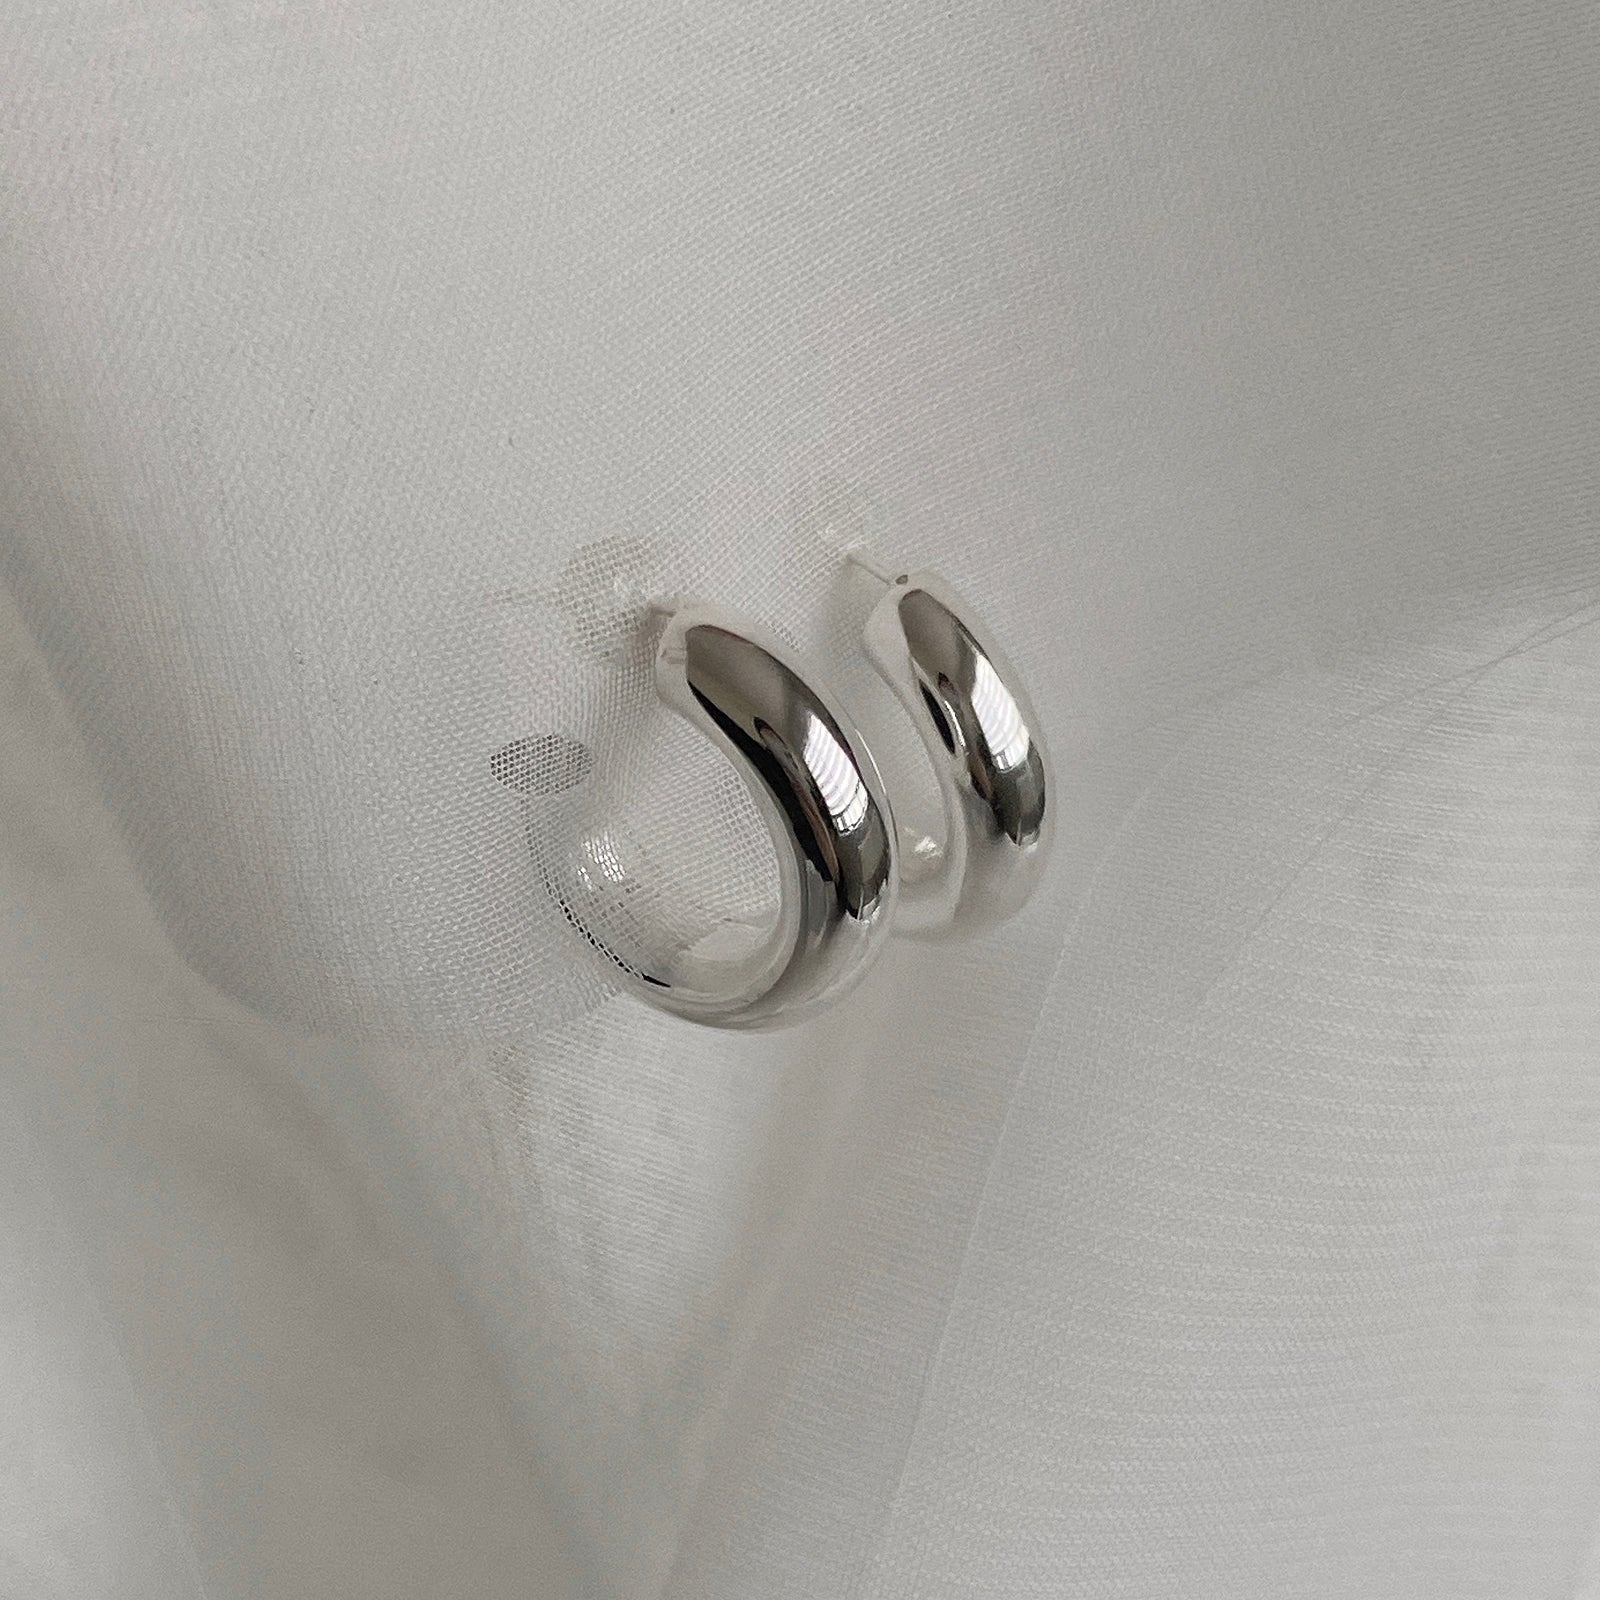 Top view of the Hollow Tube Hoops. These hoop earrings are made of 925 sterling silver with a push back for closure. These earrings are lightweight and hollow.